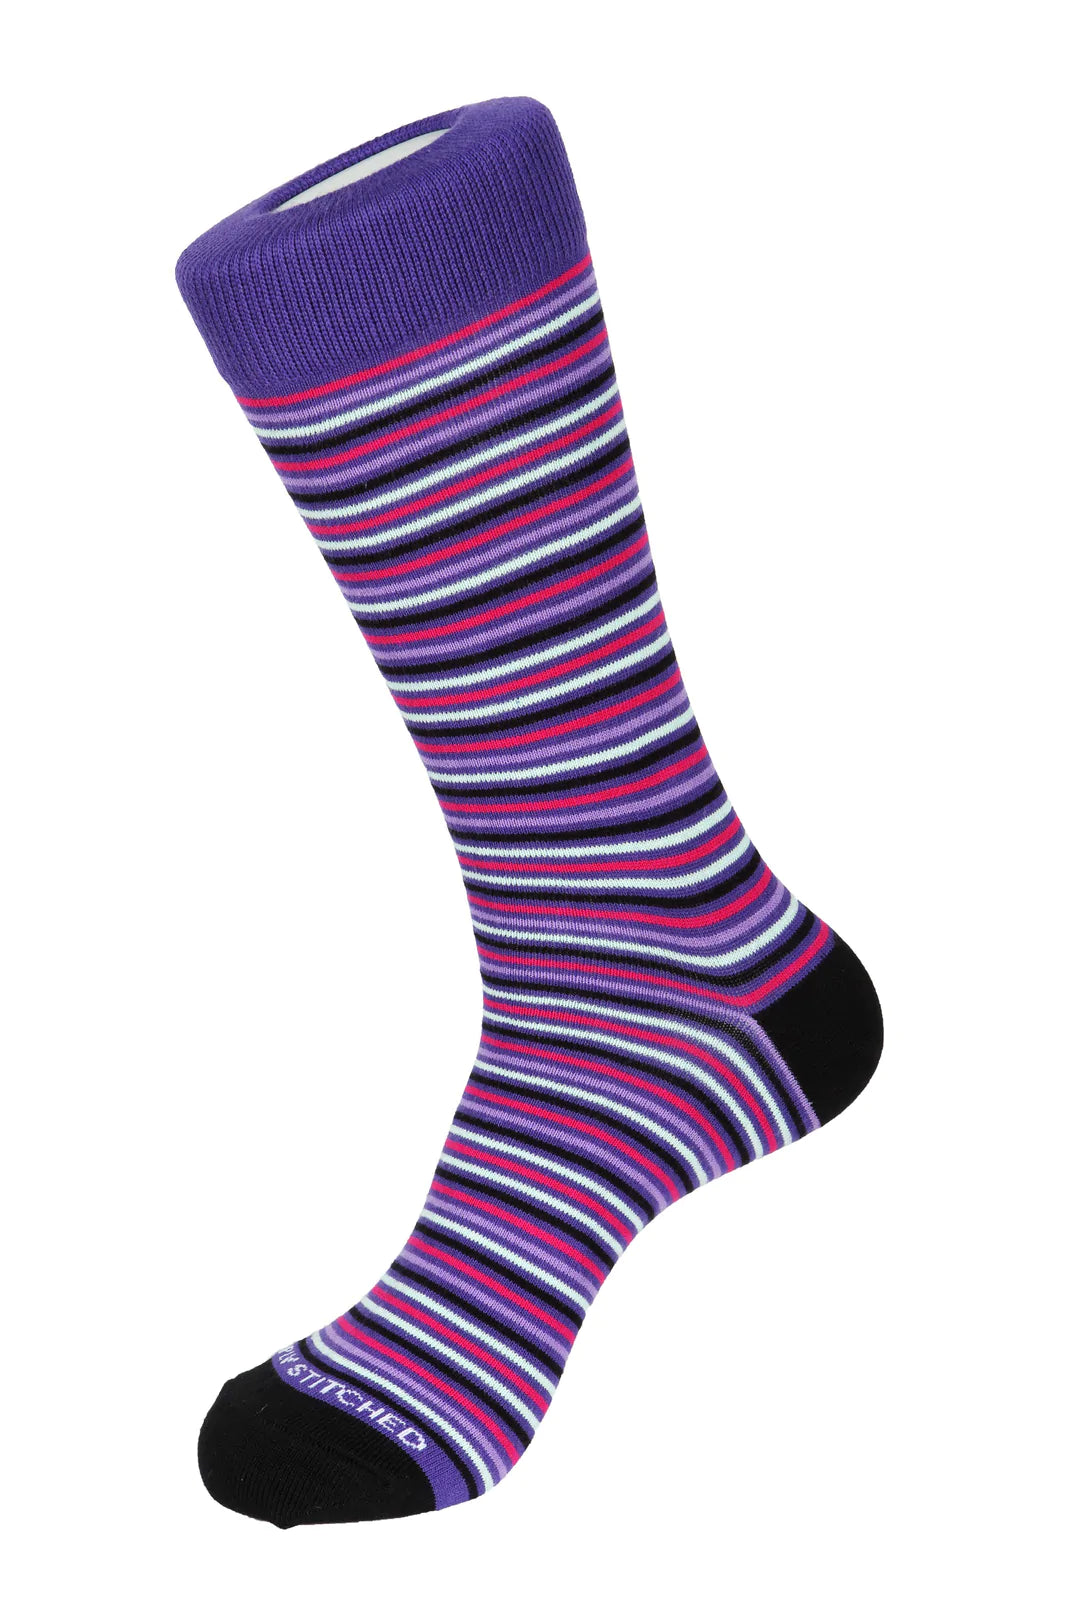 Unsimply Stitched purple socks with multi colored stripes, making it a great pairing with DFR89 blue denim jeans and a fun Sugar sport shirt.